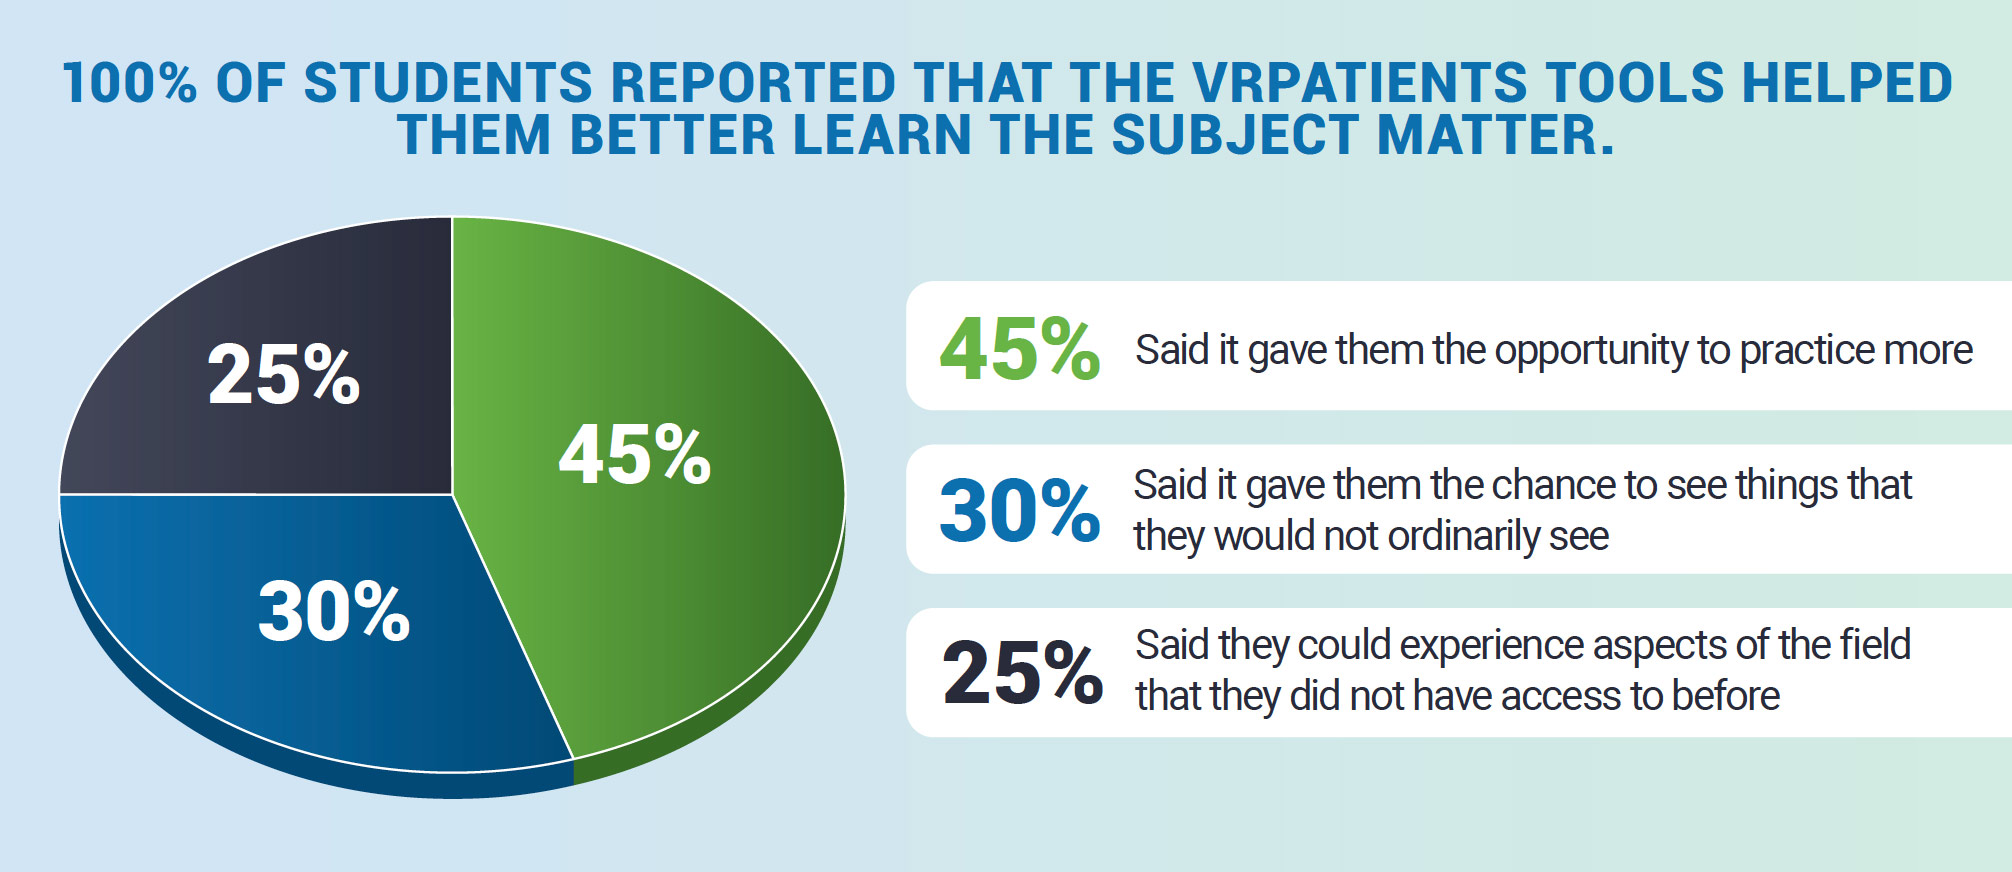 VRpatients: 100% of students reported that the VRpatients tools helped them better learn the subject matter. 